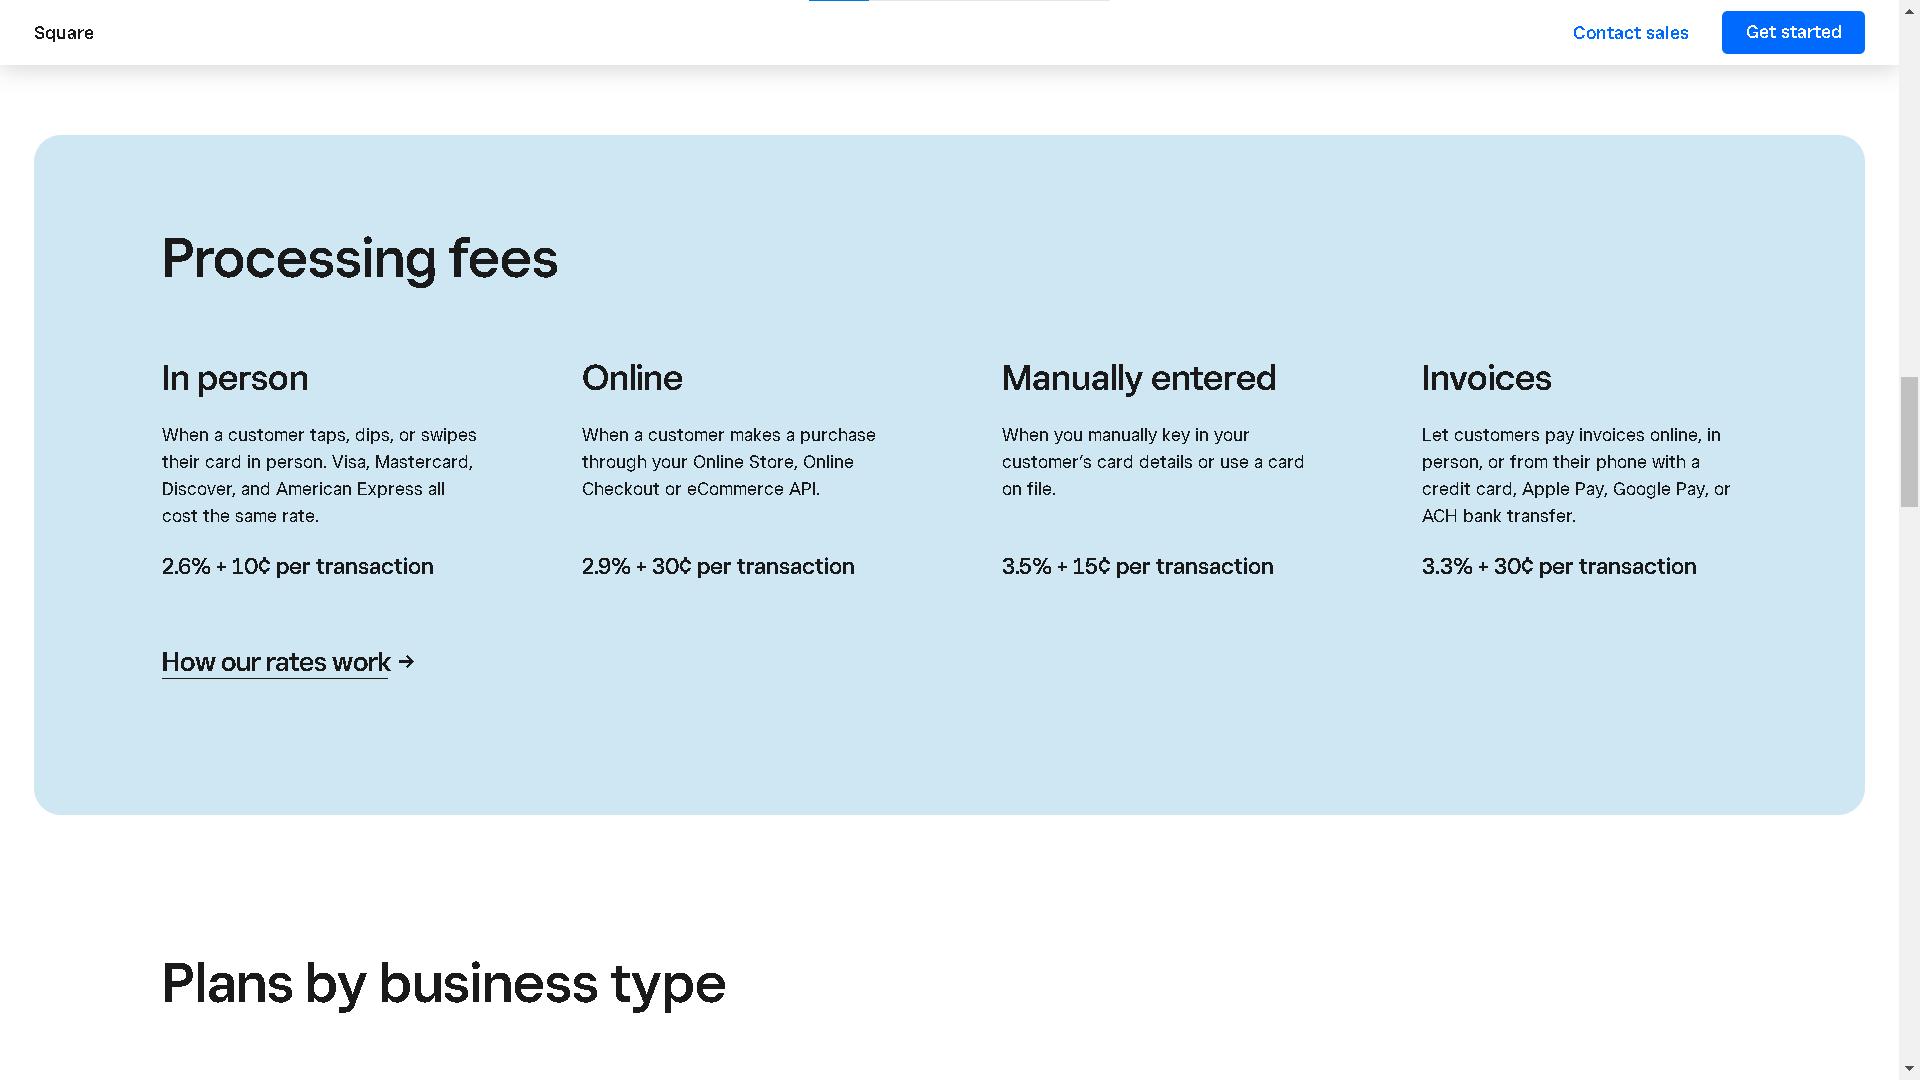 Square's pricing page